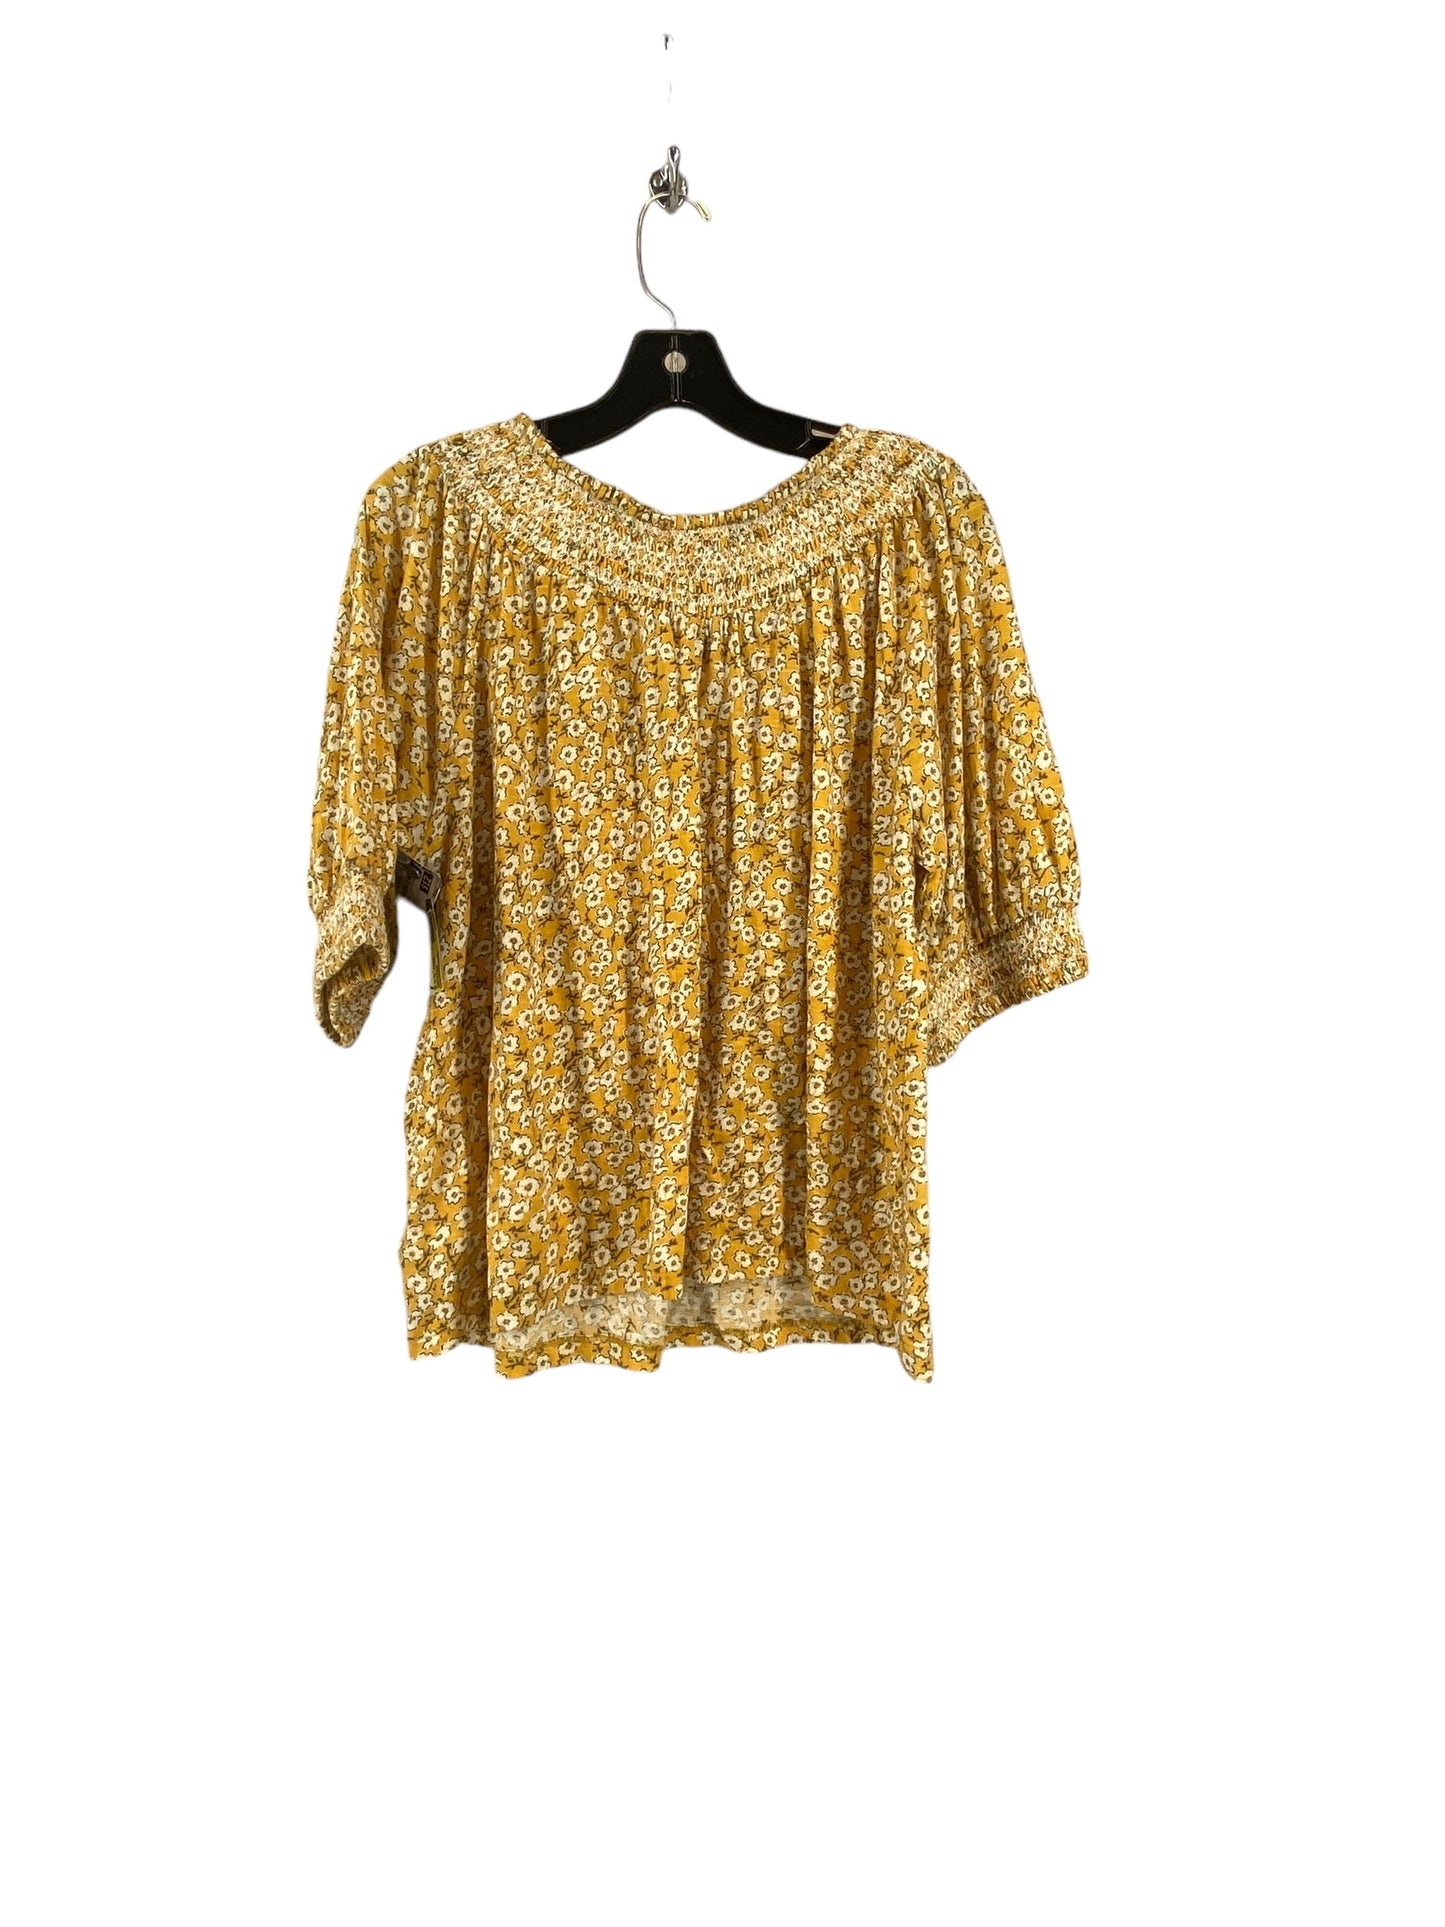 Yellow Top 3/4 Sleeve Lucky Brand, Size S